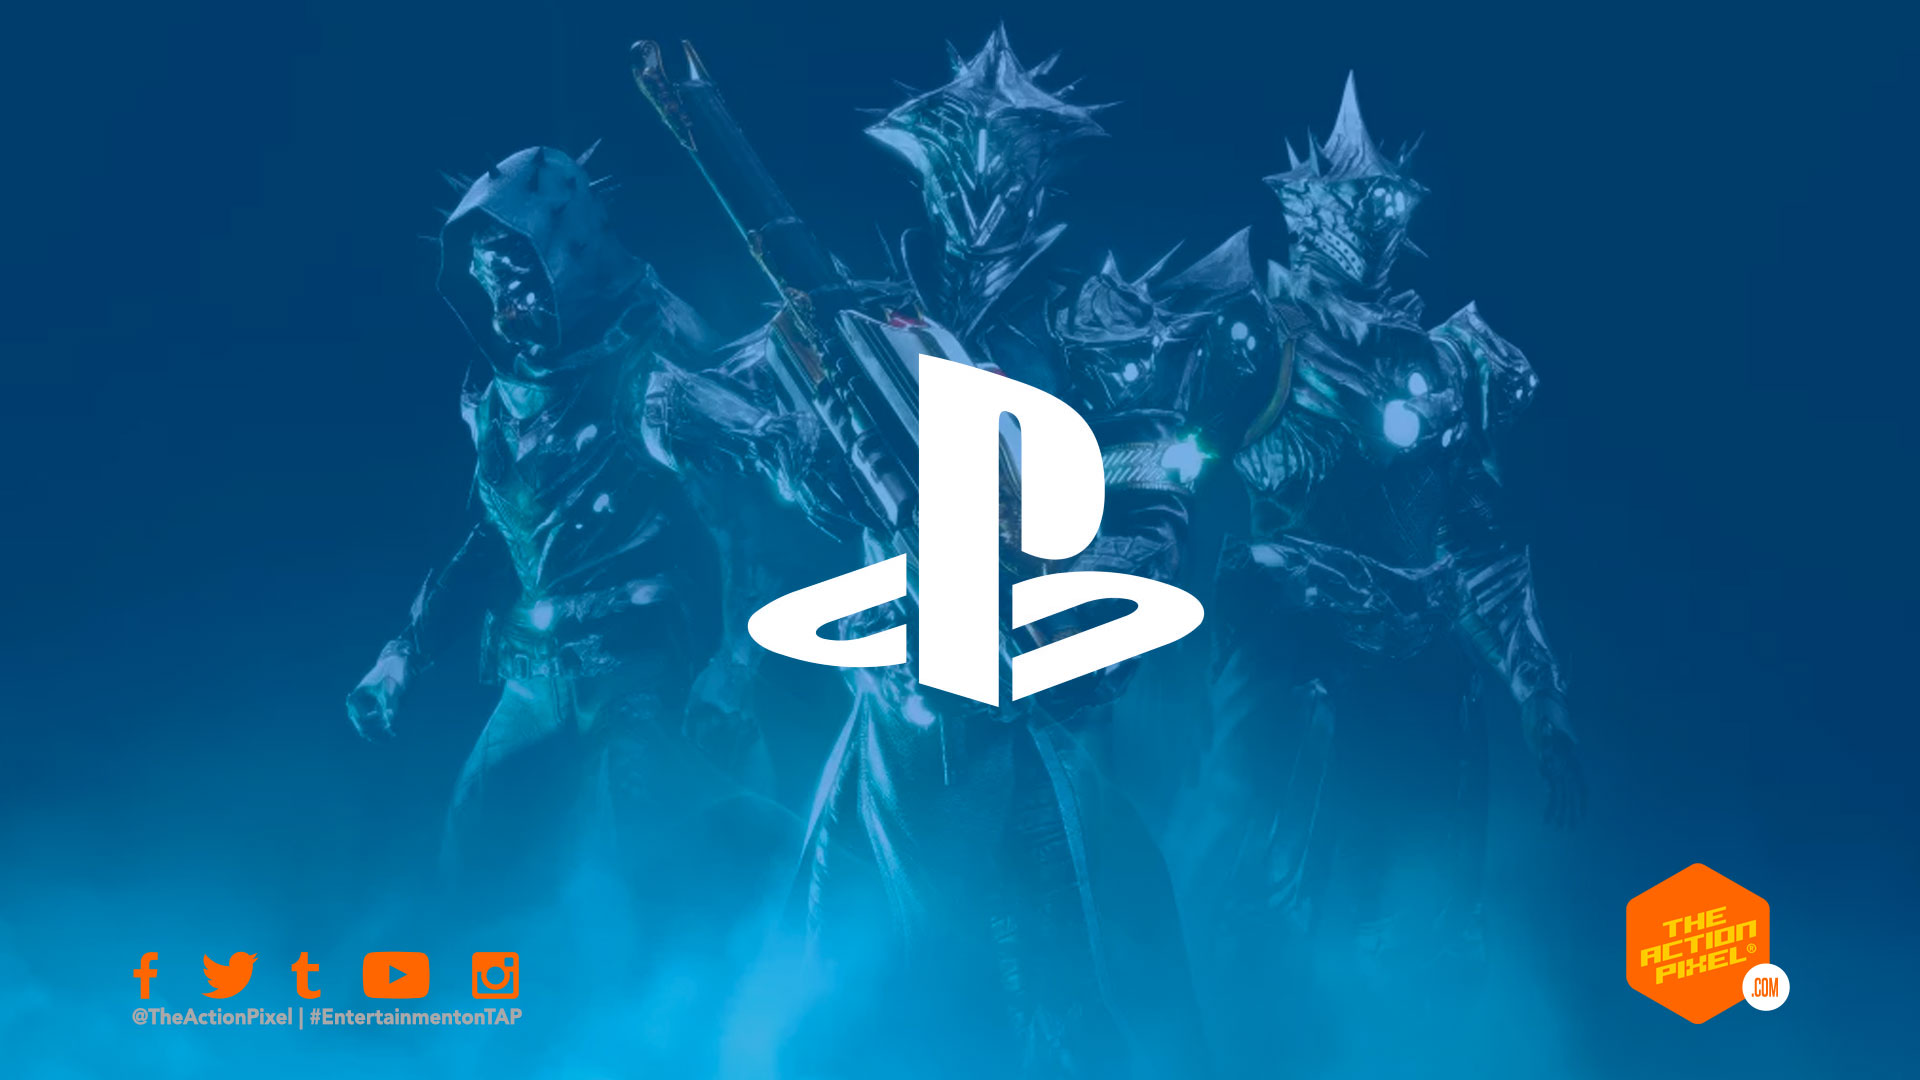 playstation, Bungie, Sony, Microsoft, the action pixel, entertainment on tap, featured